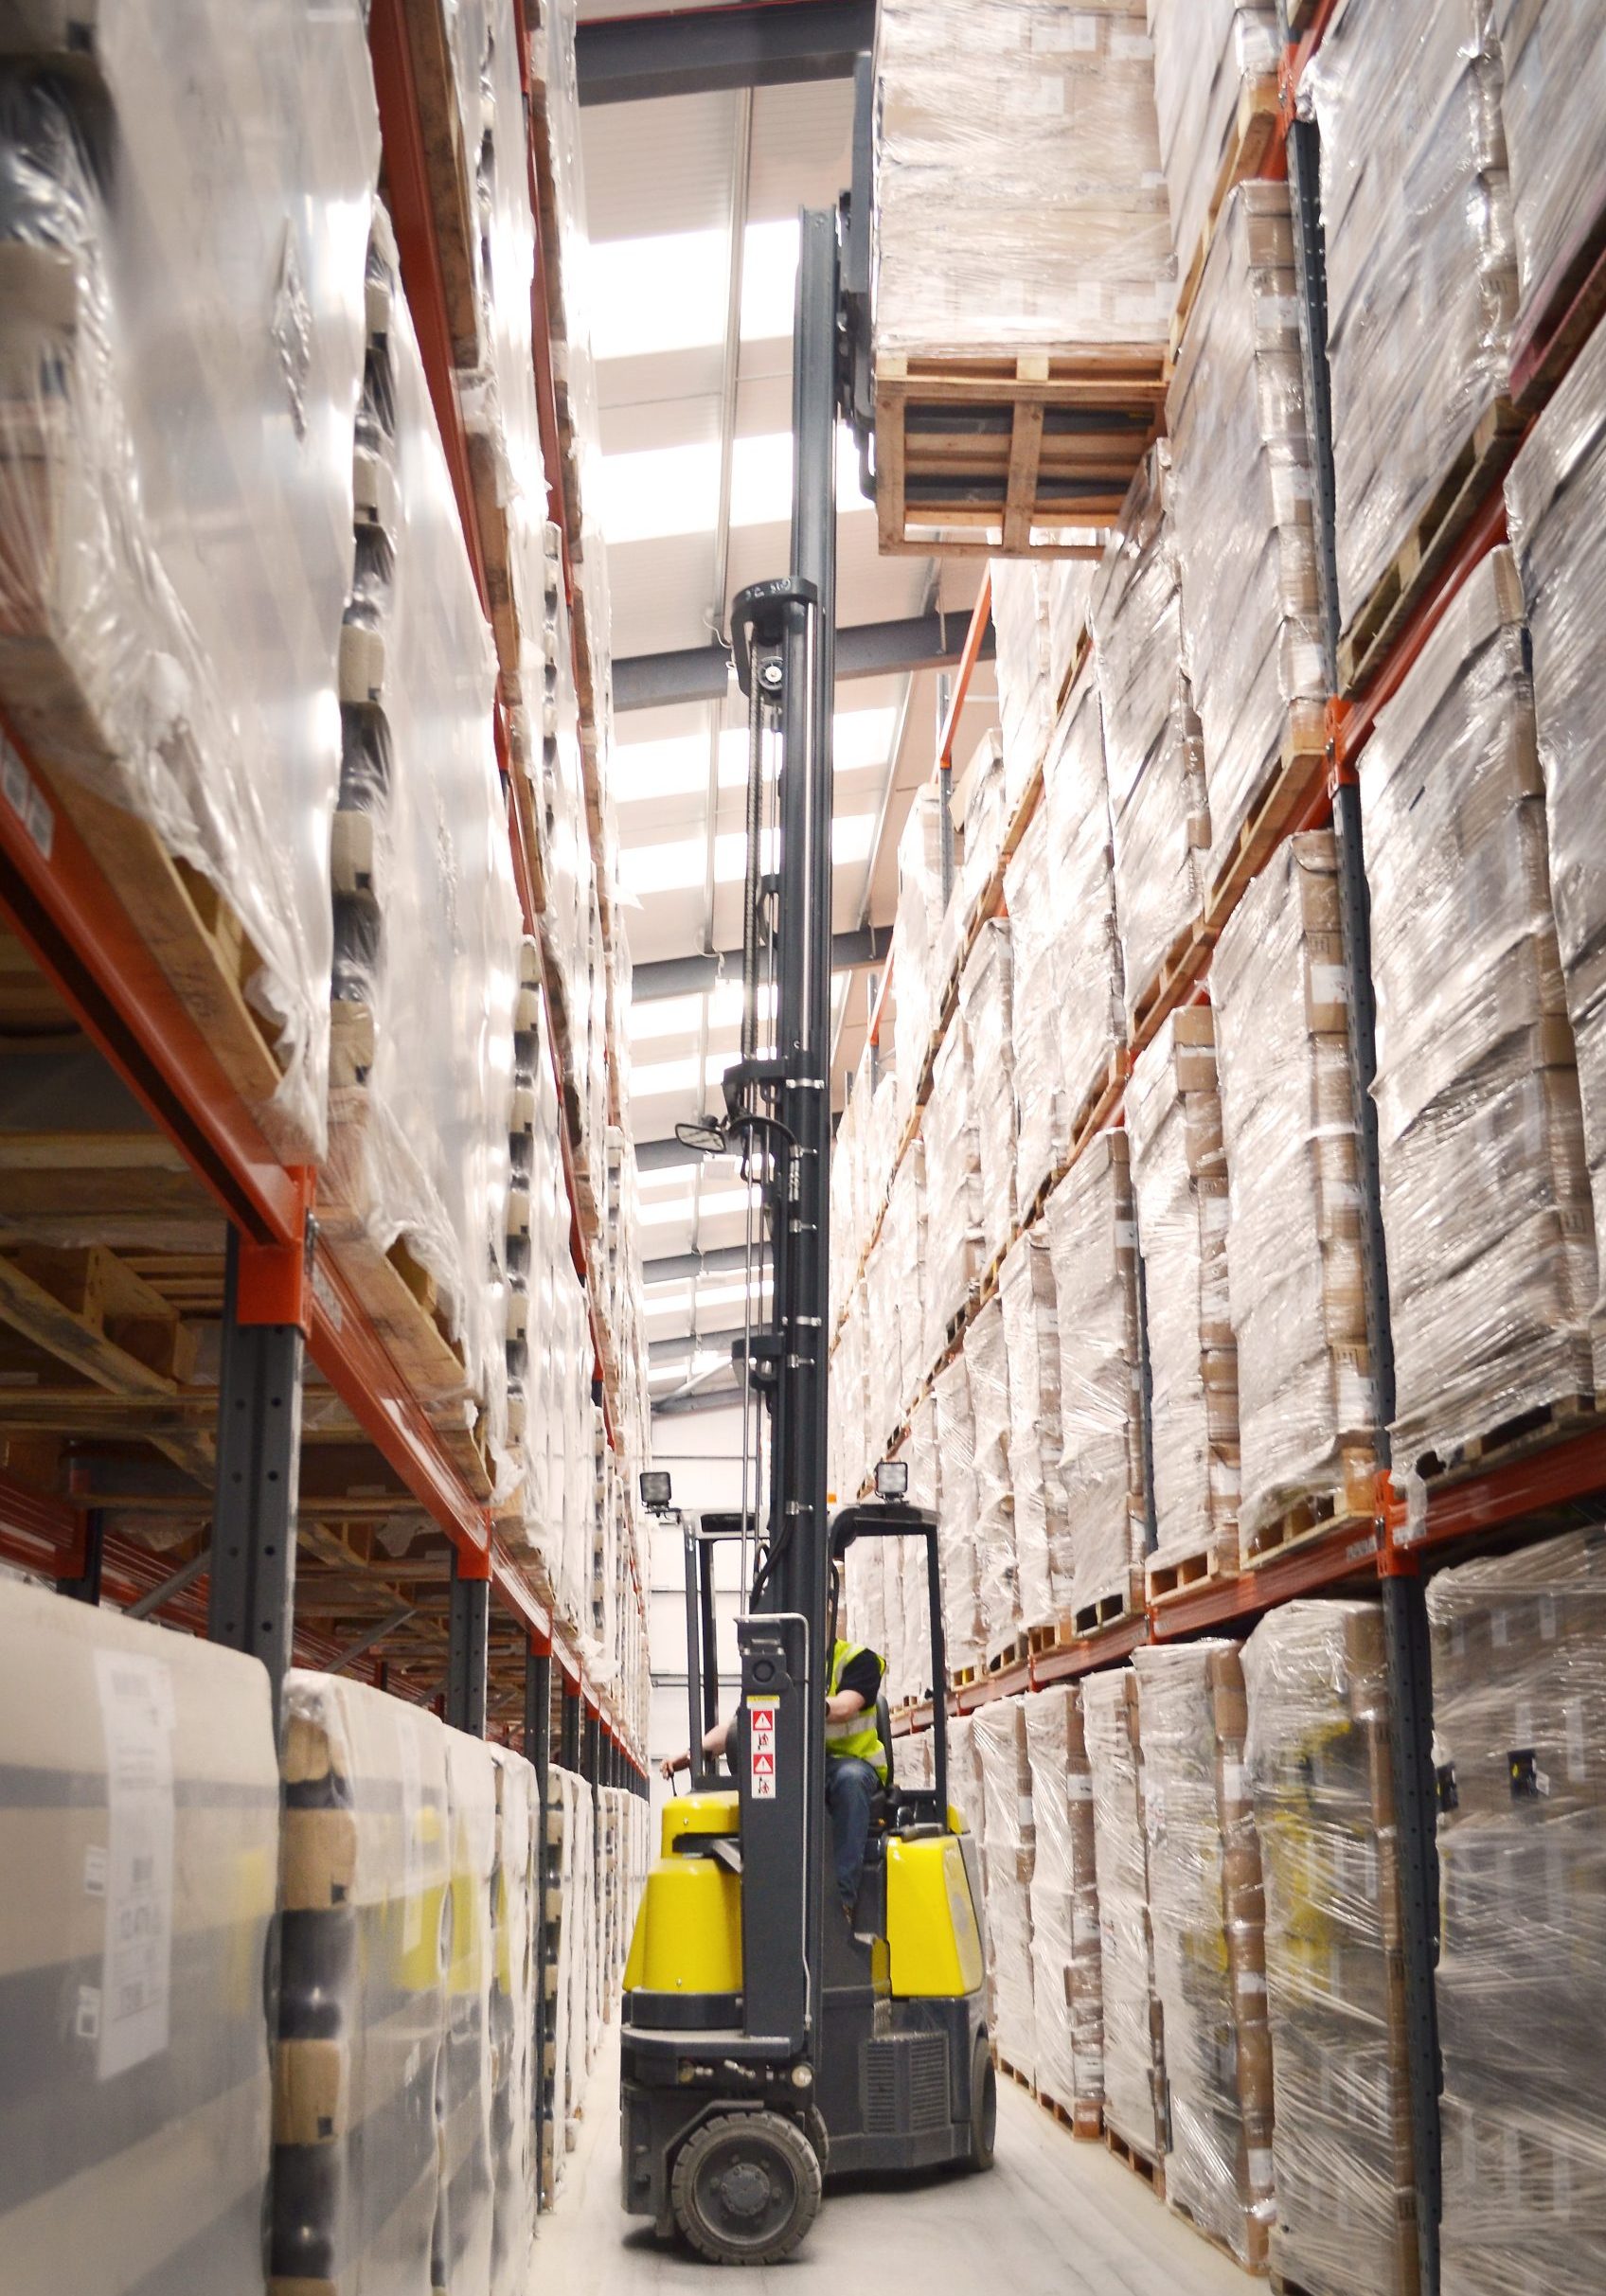 Articulated VNA Combilift Aislemaster Electric Forklift in use (Warehousing)